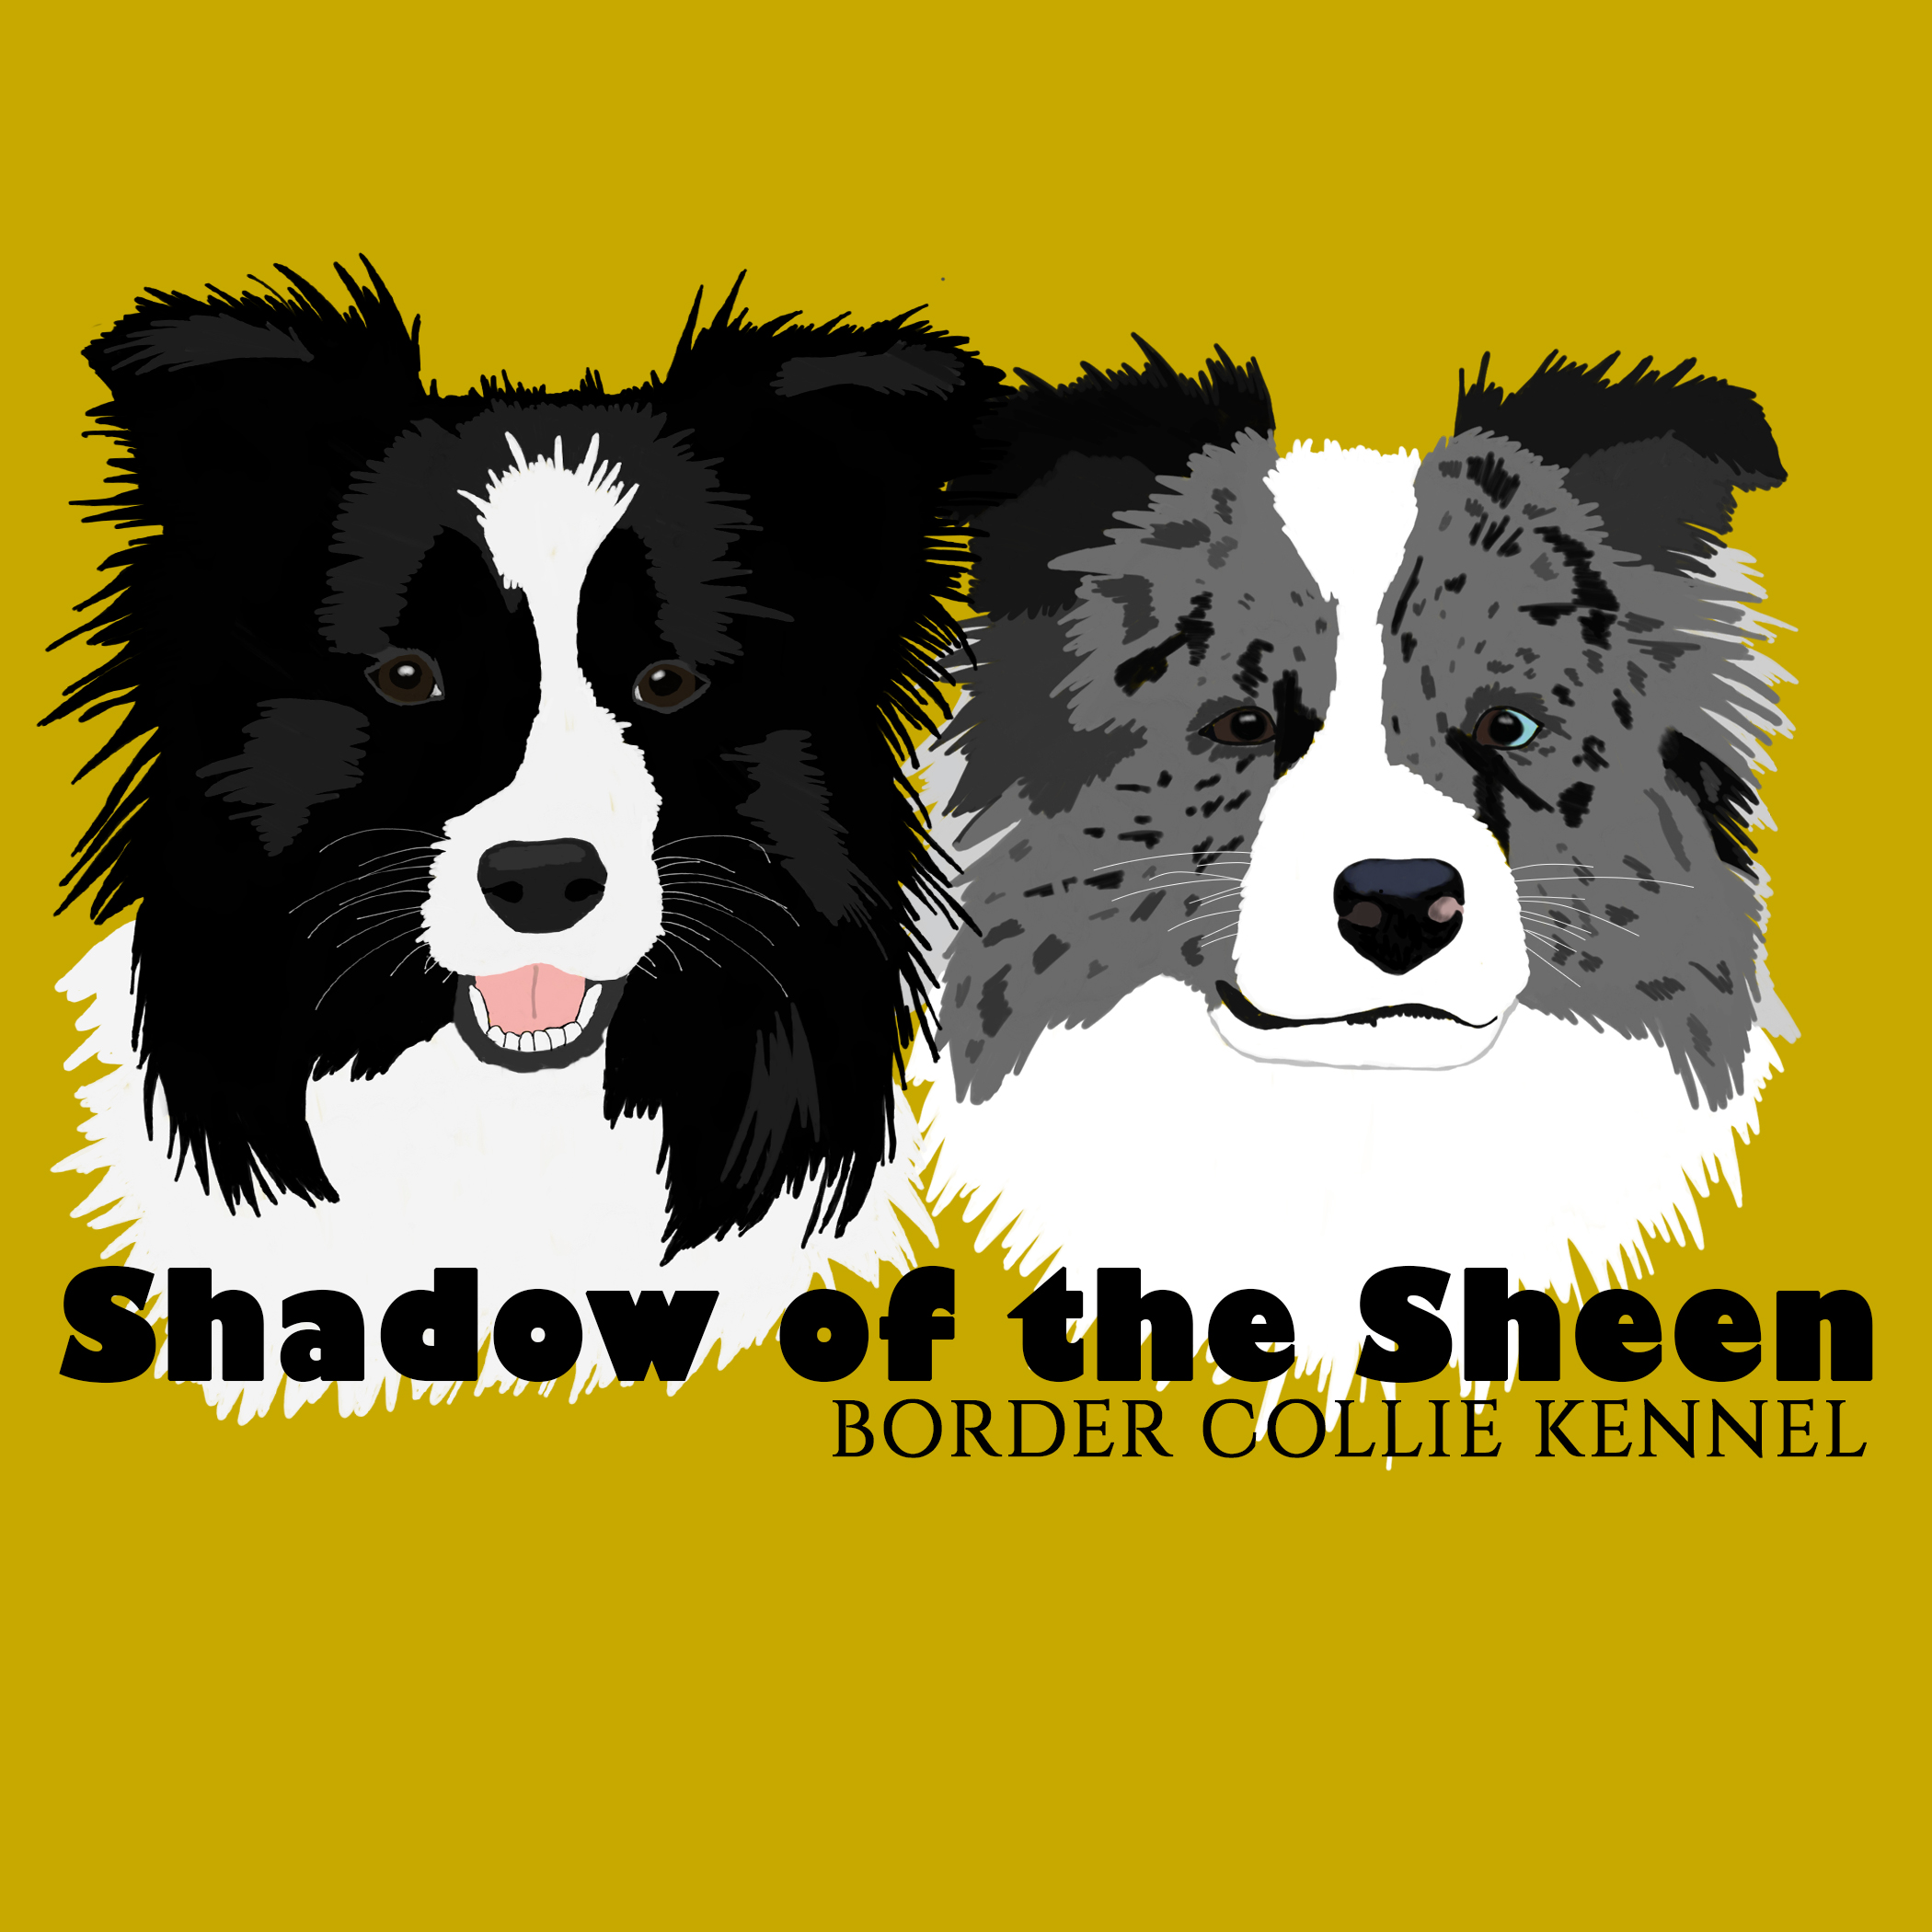 Shadow of the Sheen kennel